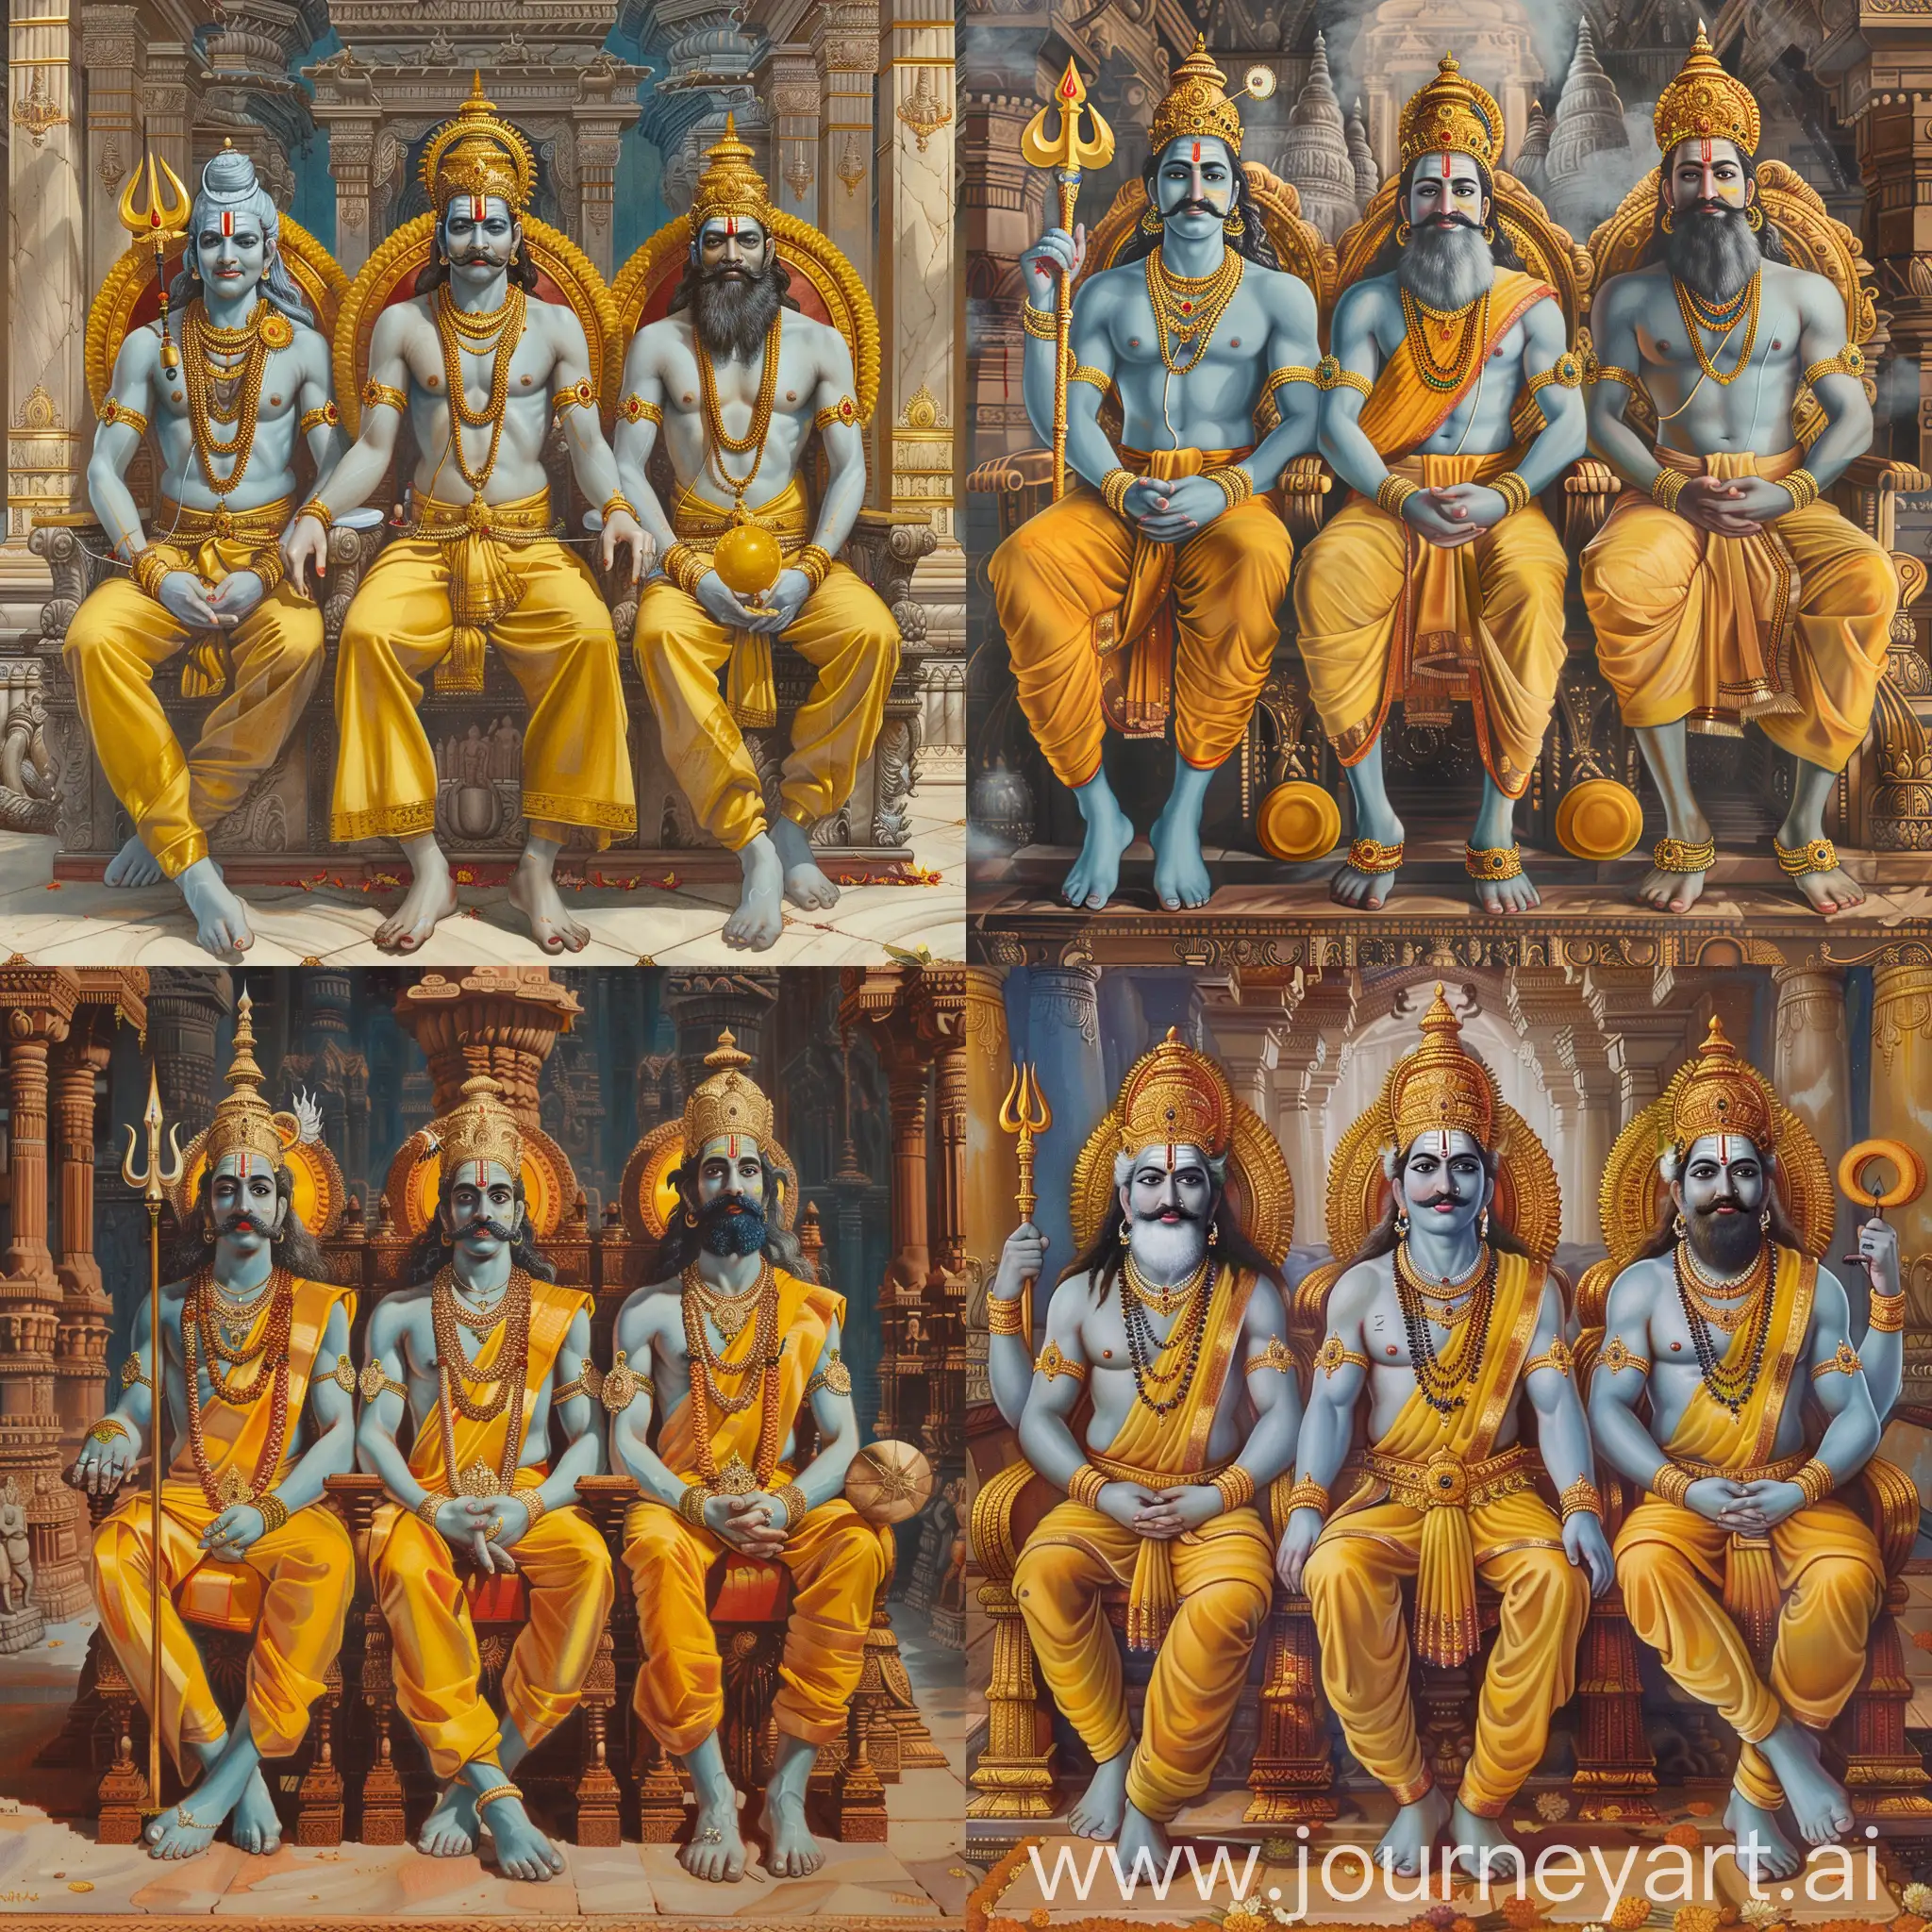 painting mode : 

painting mode : 
three Hindu gods are sitting on their imperial thrones, they all have Indian mustache, light blue skin and yellow pants,

Shiva is the left one, he holds a golden trident in his hands,
Brahma with beards is the center one,
Vishnu is the right one, he holds a golden round hammer in his hands,

they are all inside a splendid Hindu temple,